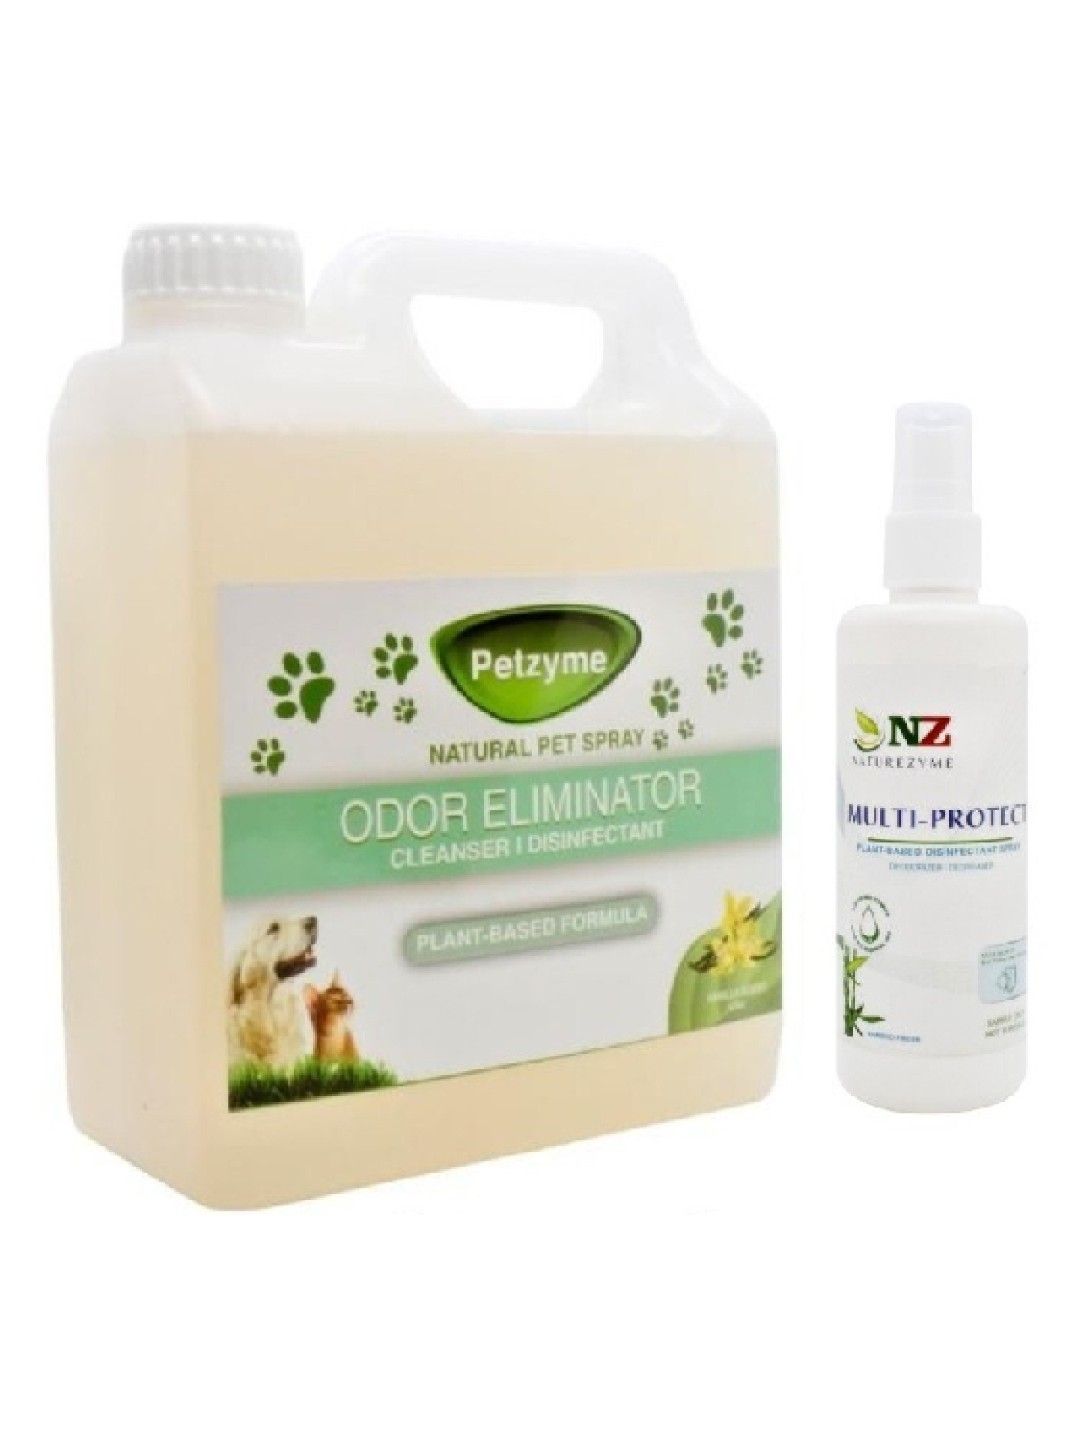 Petzyme Natural Pet Area Spray Odor Eliminator (1L) with Free Multi Protect